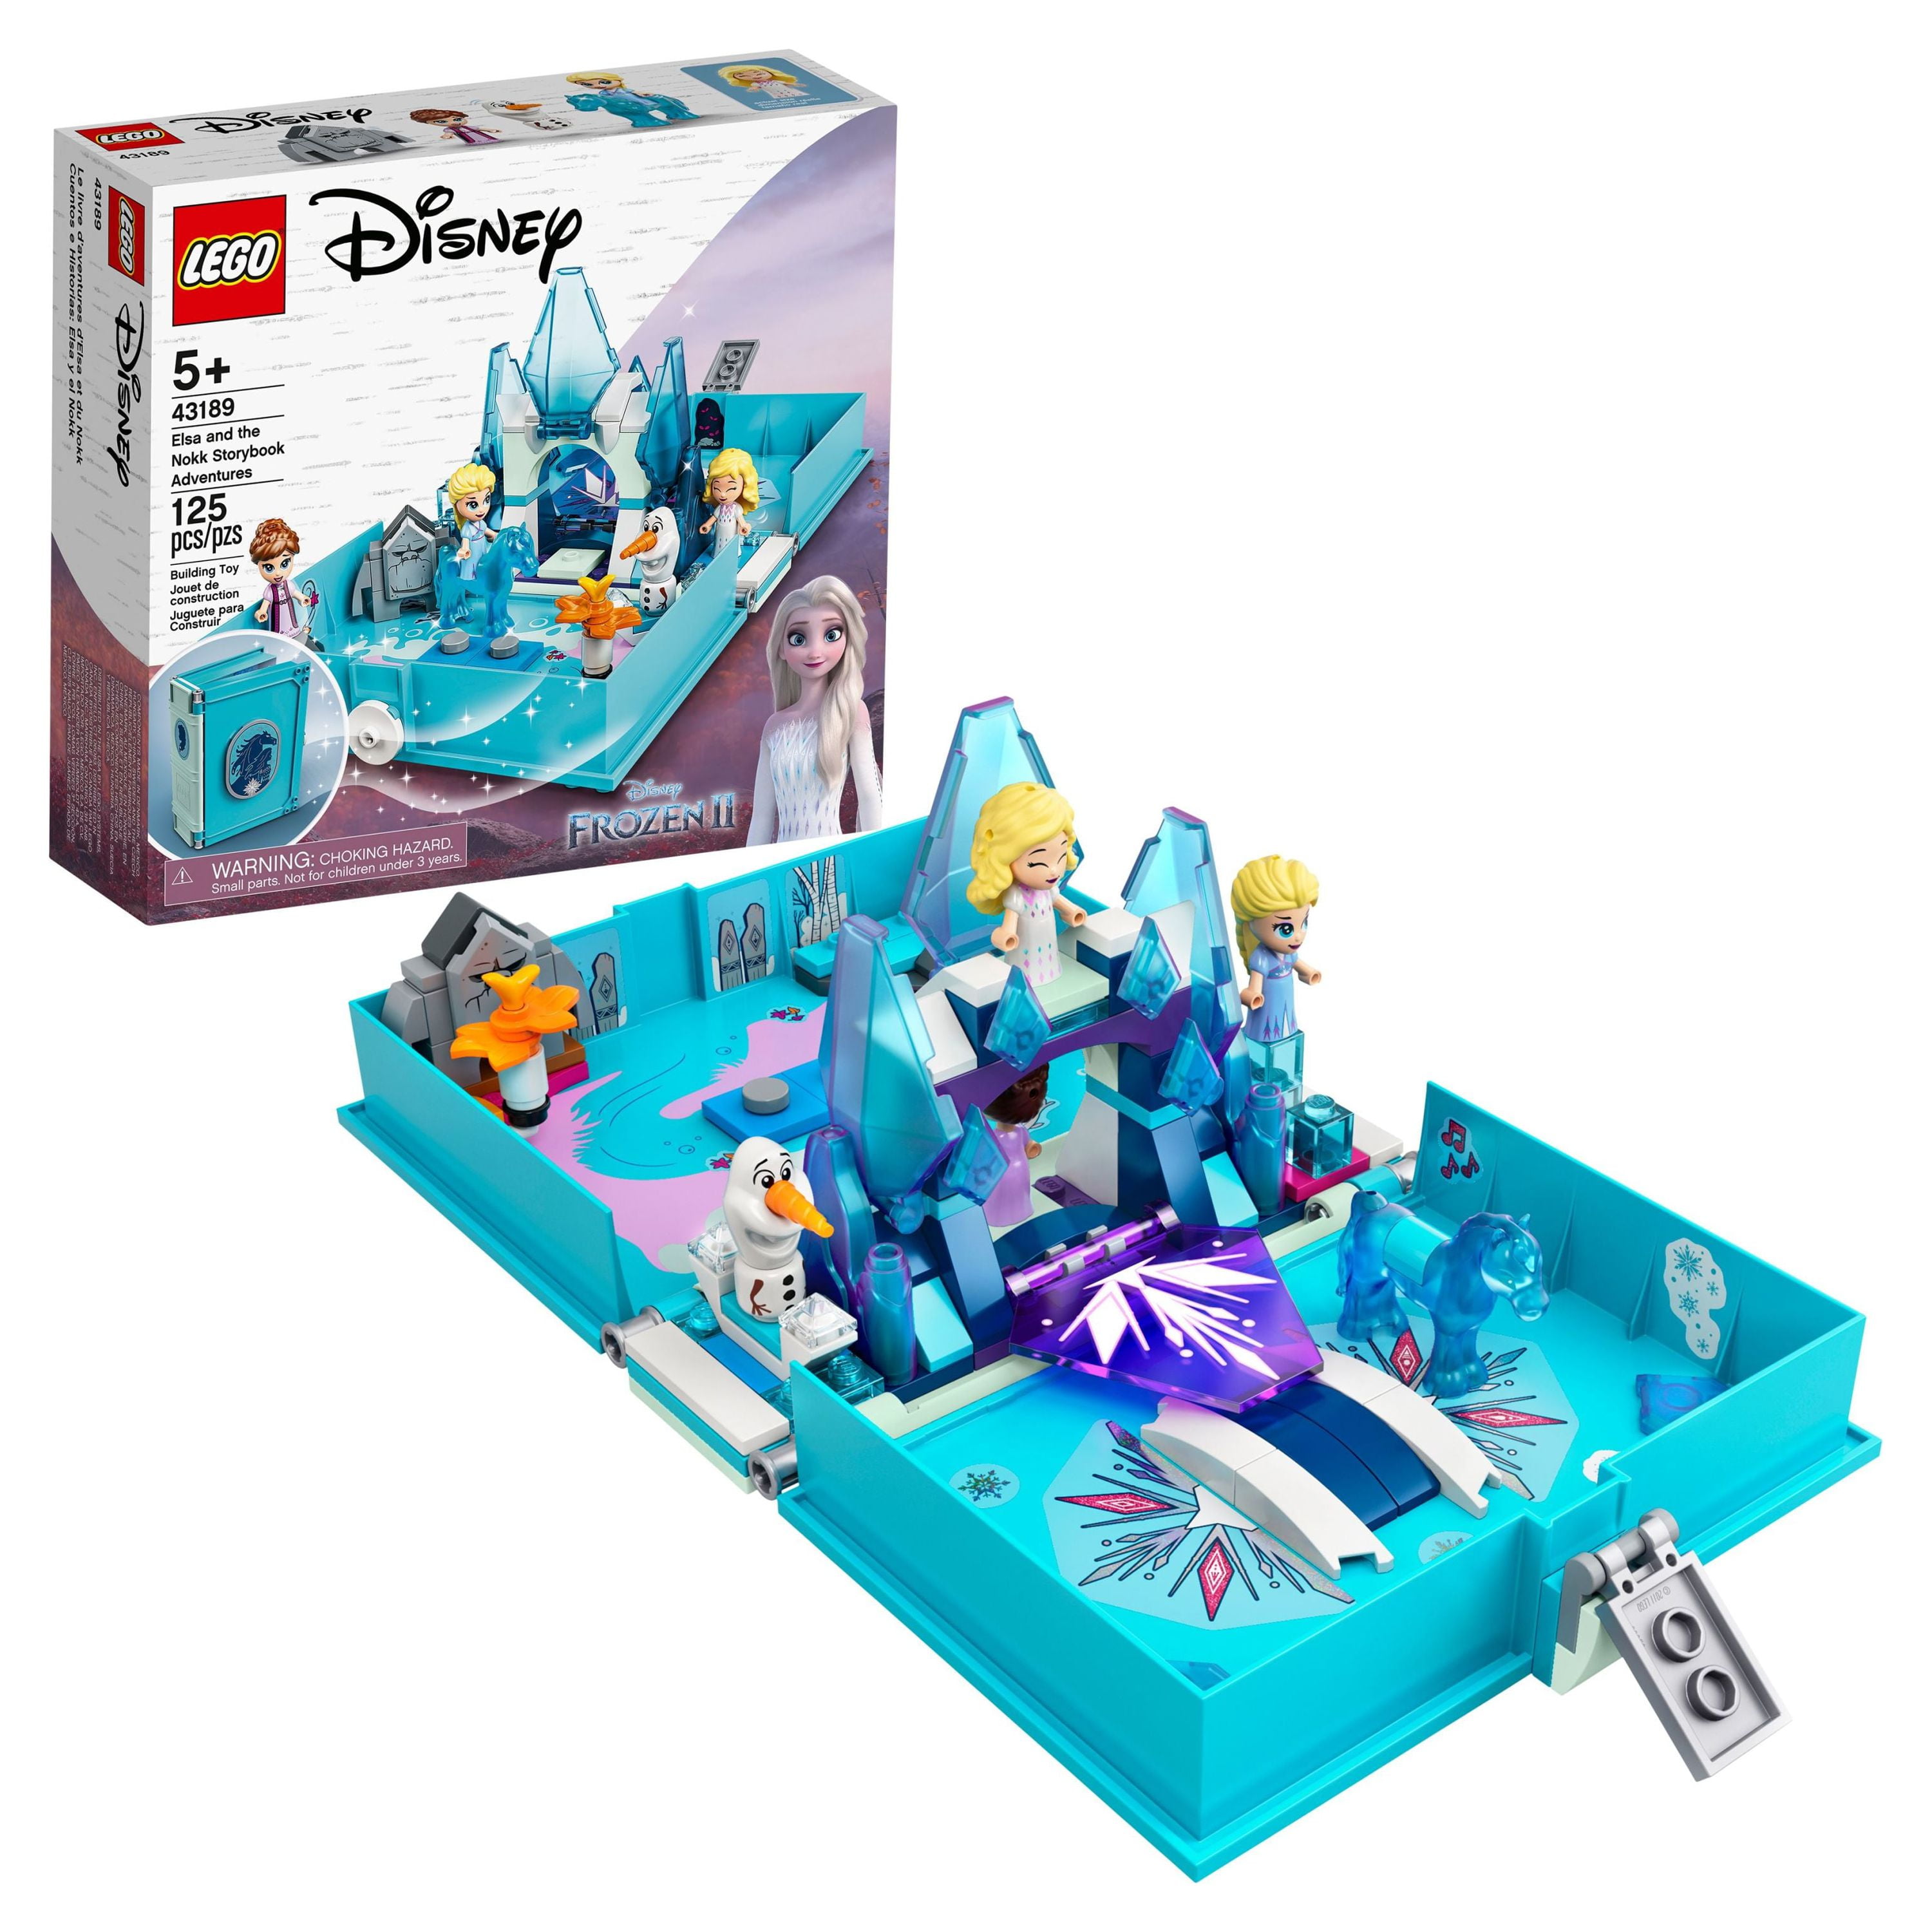 Plus for for LEGO Perfect 5 with Doll 43189, Kids, Travel, Storybook Disney Frozen Playset Nokk Gifts Toy Adventures Disney Girls and Elsa & Micro 2 Year the Boys Princess Old